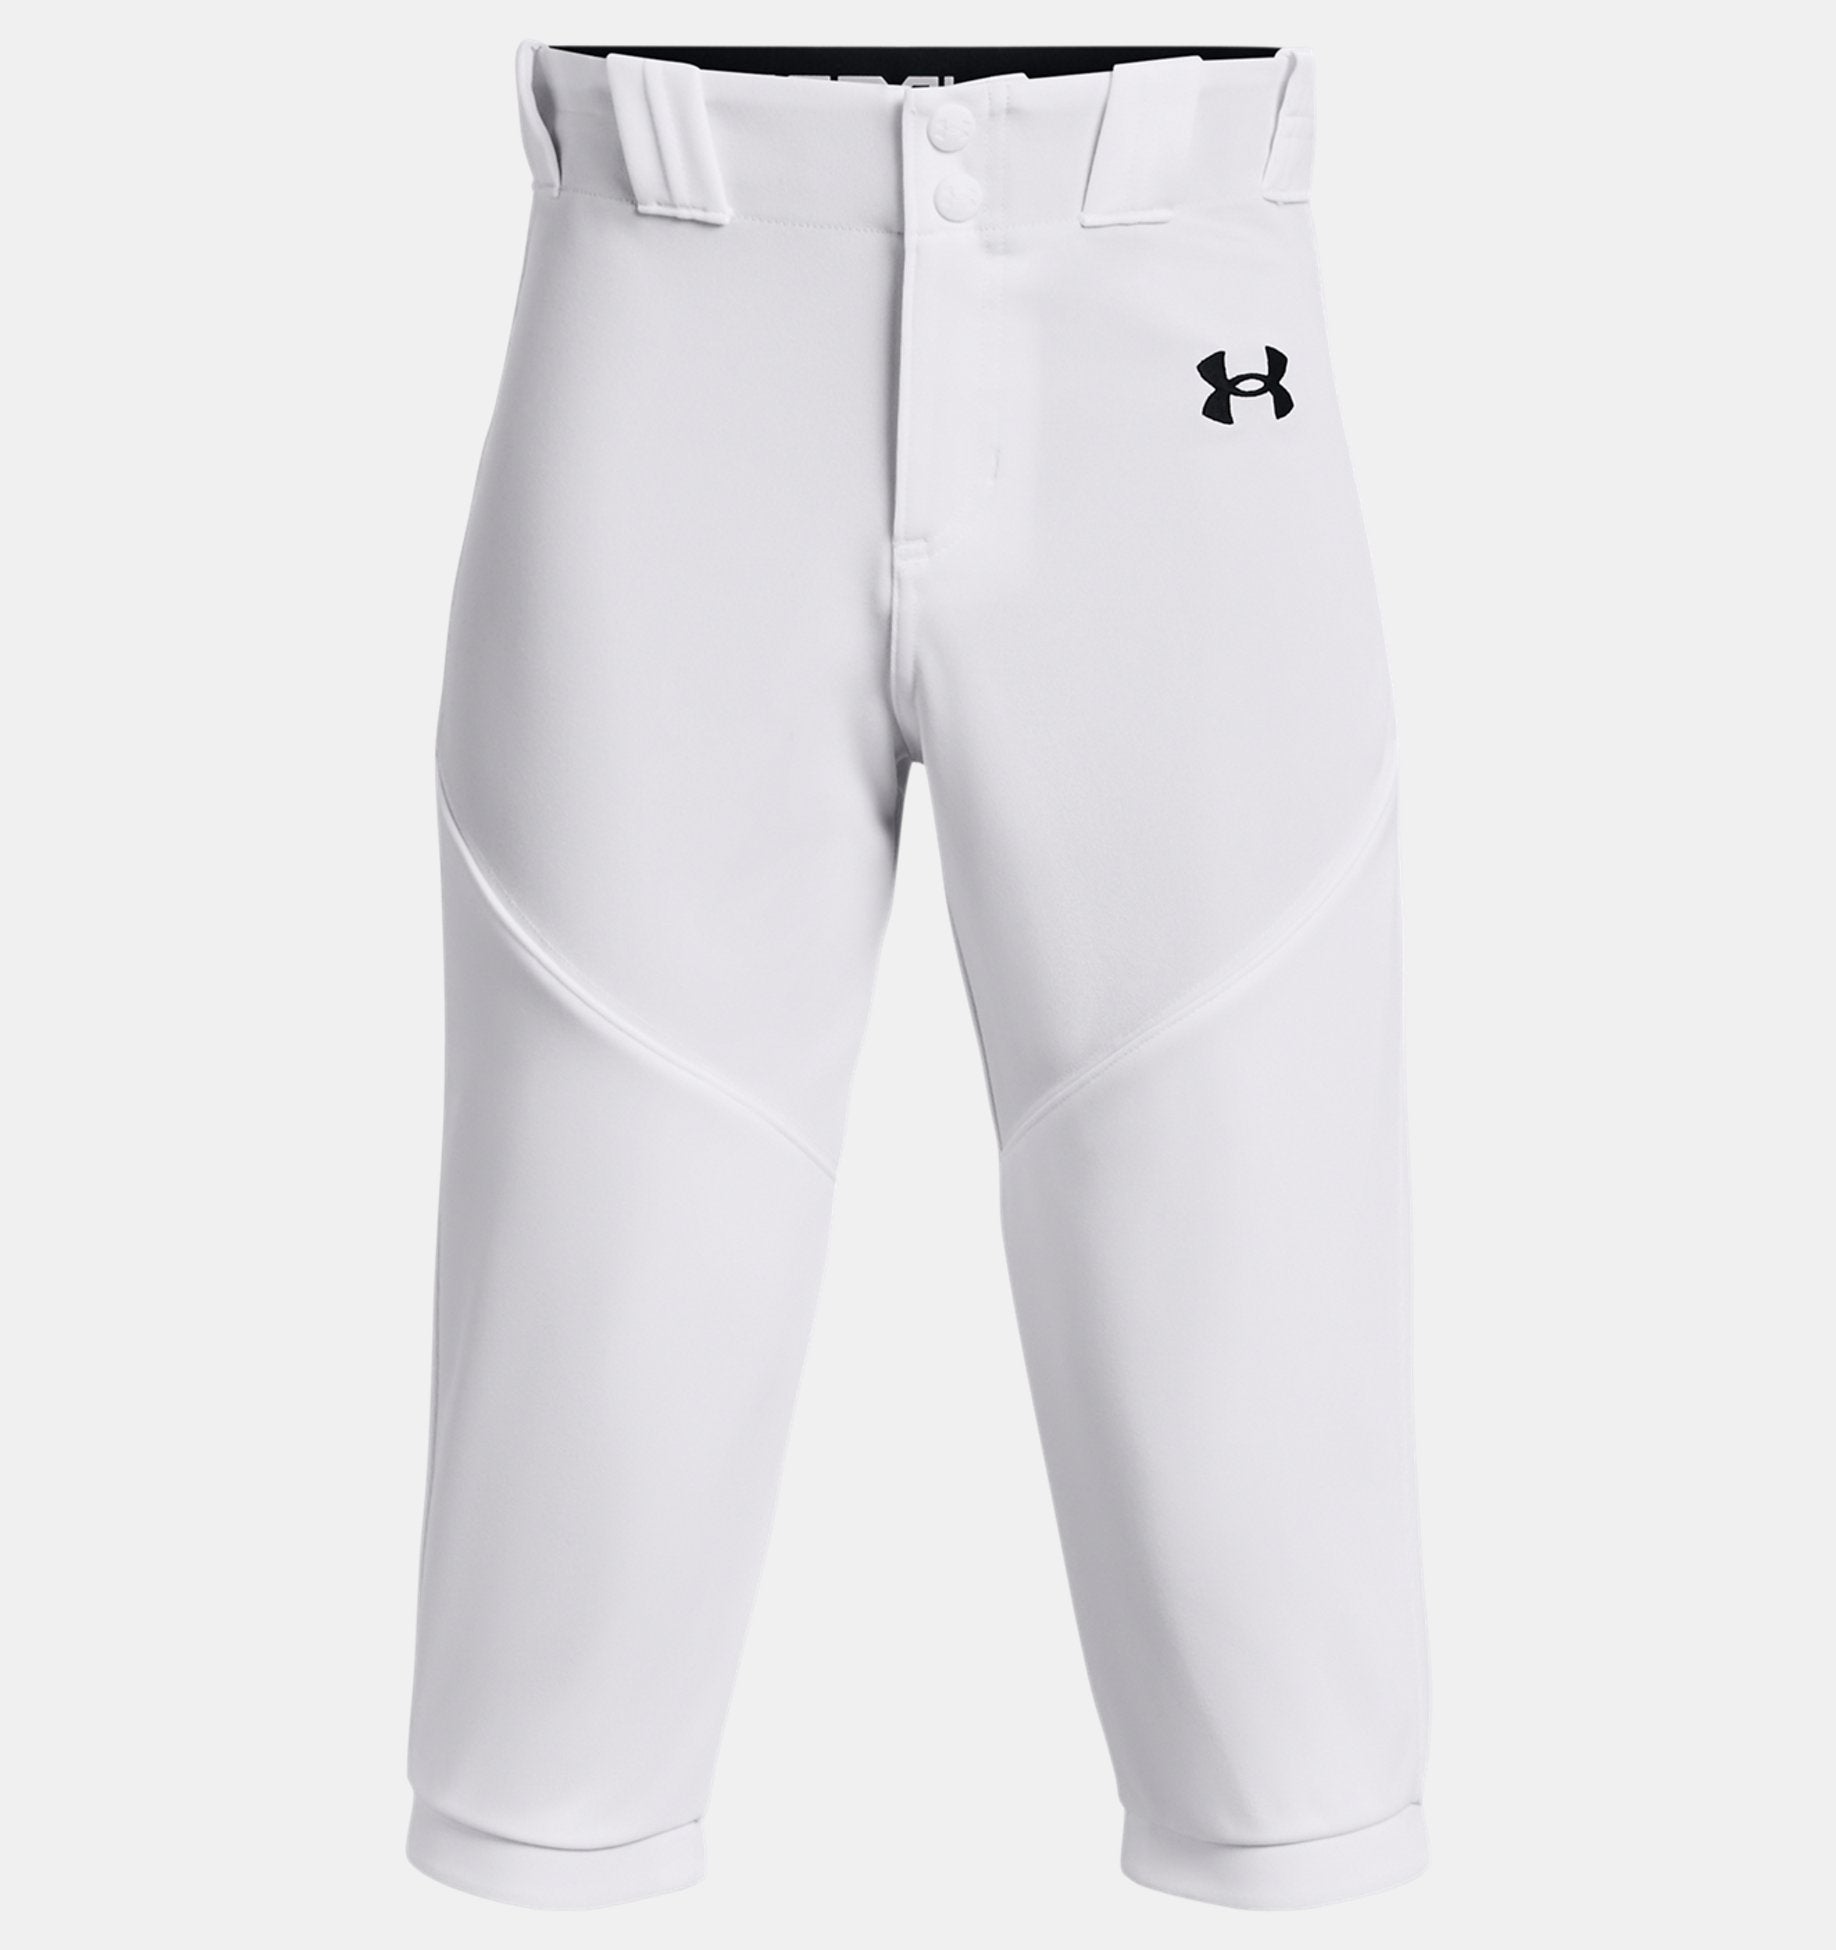 Women's Bottoms  Golf Anything Canada